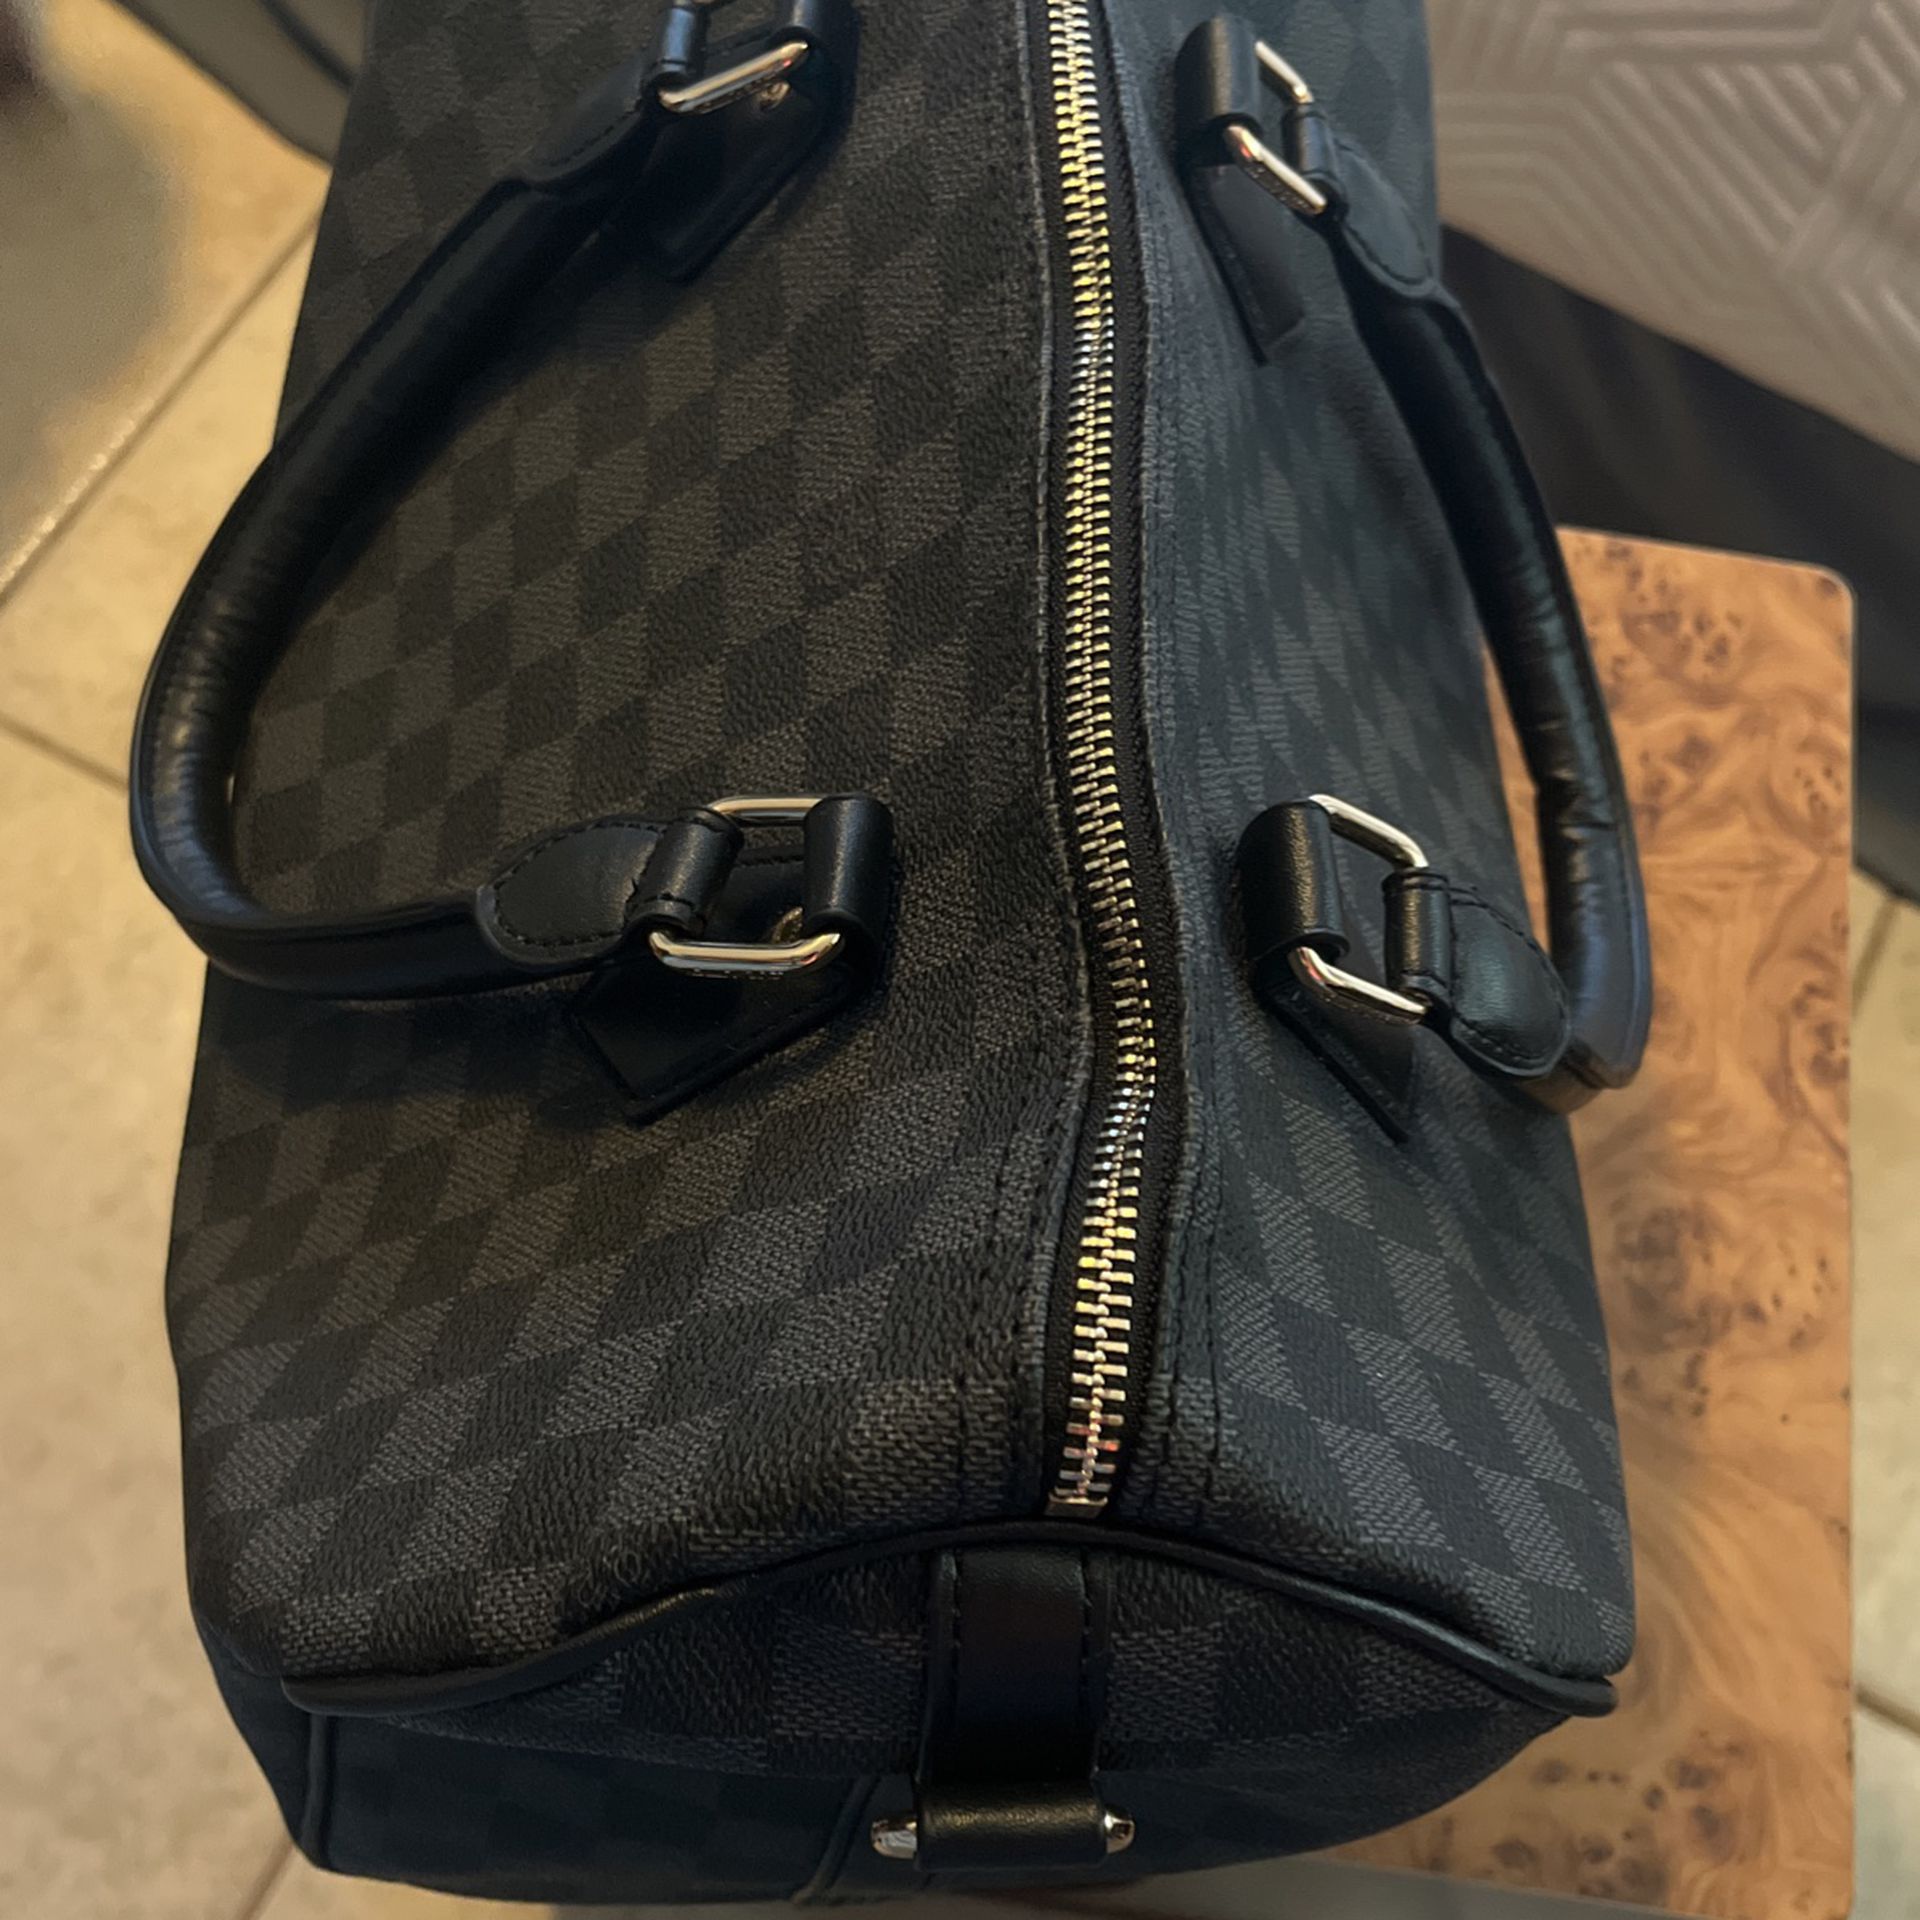 LV Duffle Bags – Exclusive Fitz